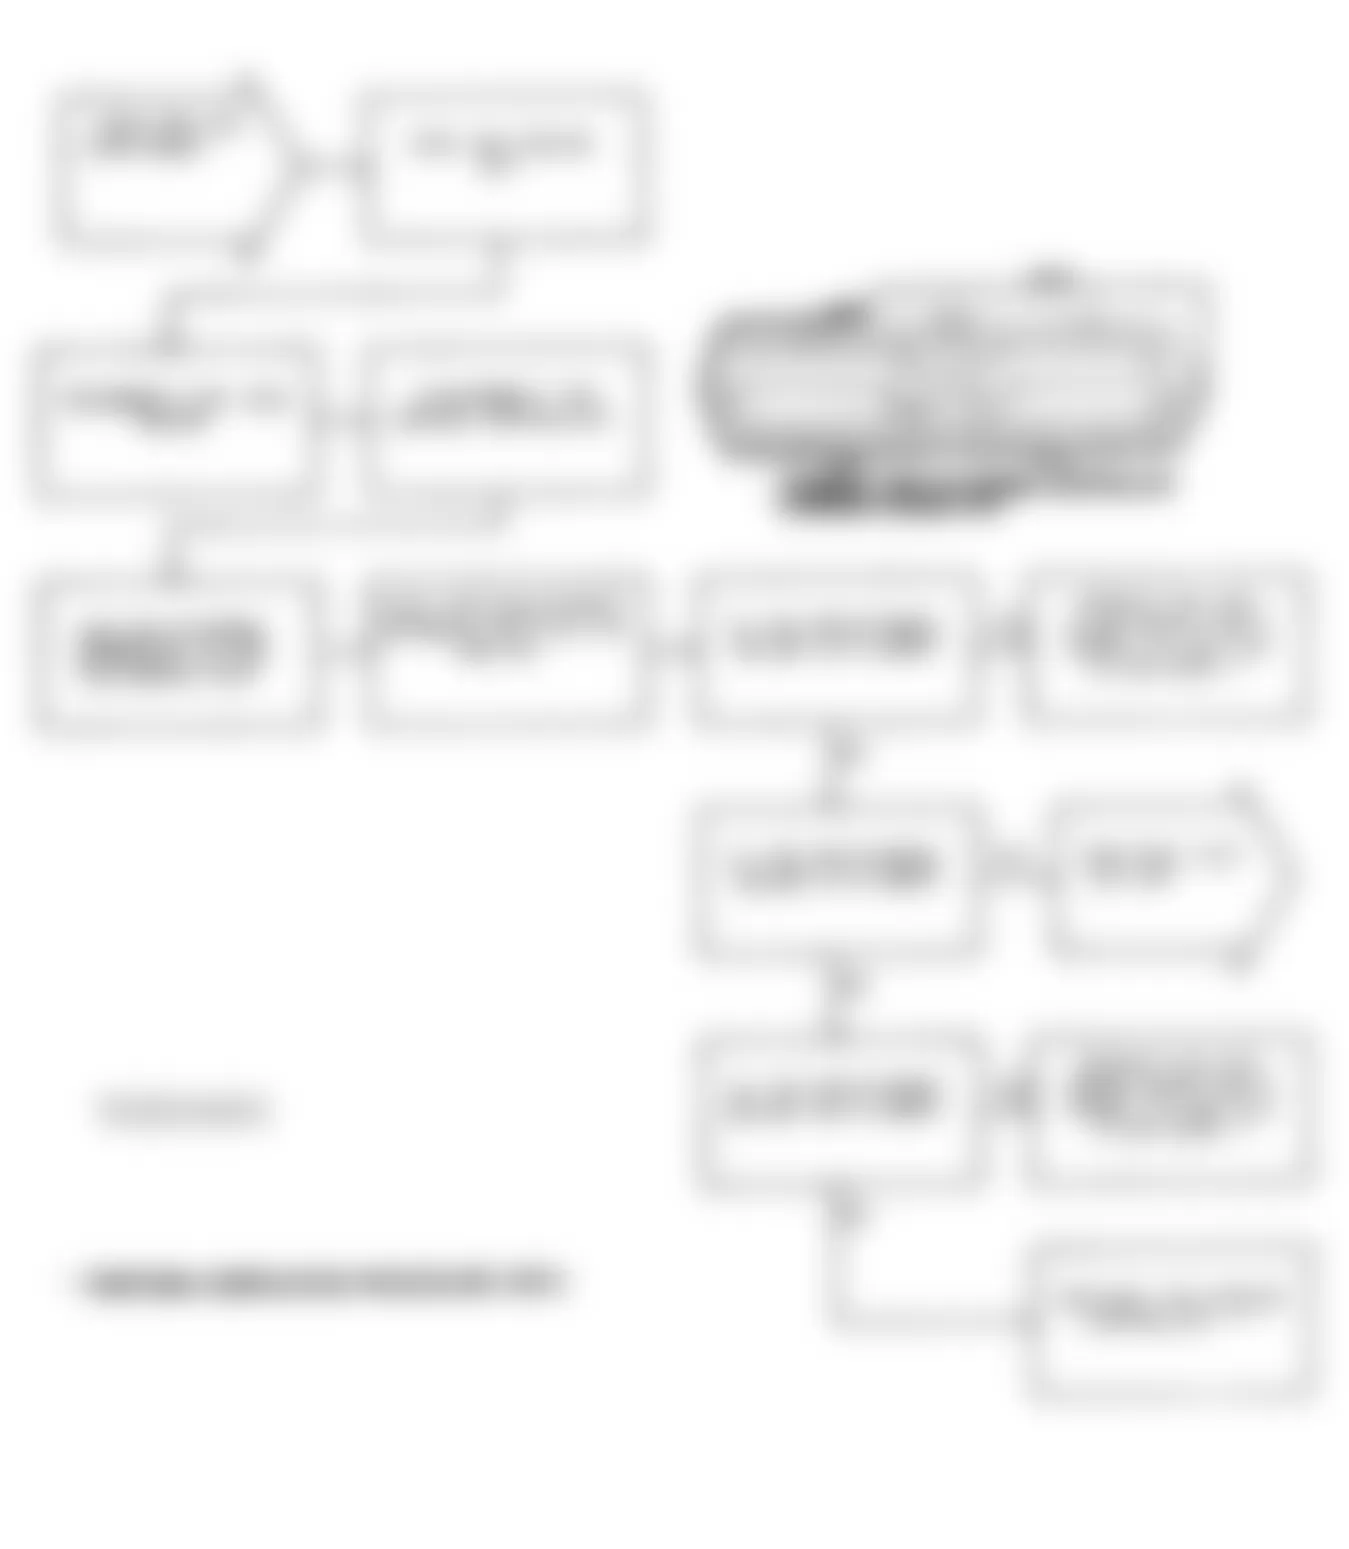 Chrysler New Yorker Salon 1991 - Component Locations -  Test DR-14A Code 25: Flowchart (3 of 4)